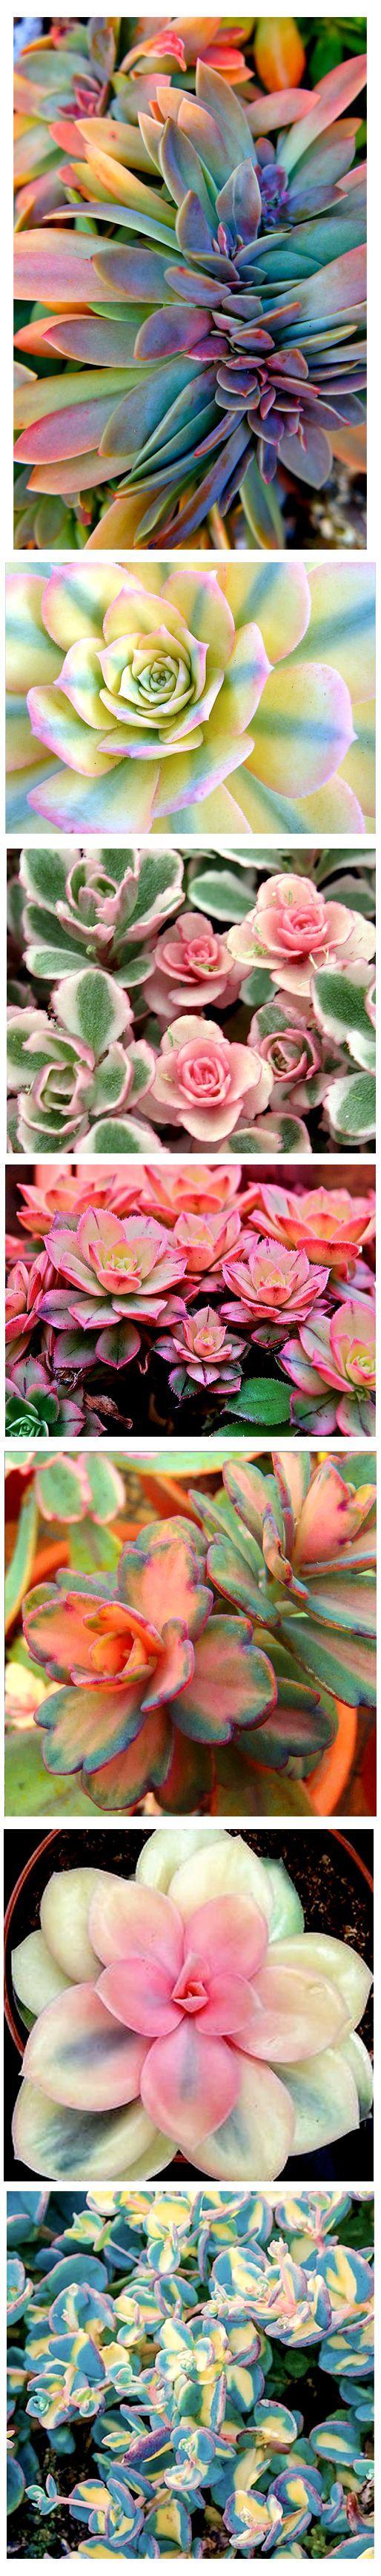 Hochzeit - Variegated Succulents . Are These Real??? Would Love To Have Some Of These